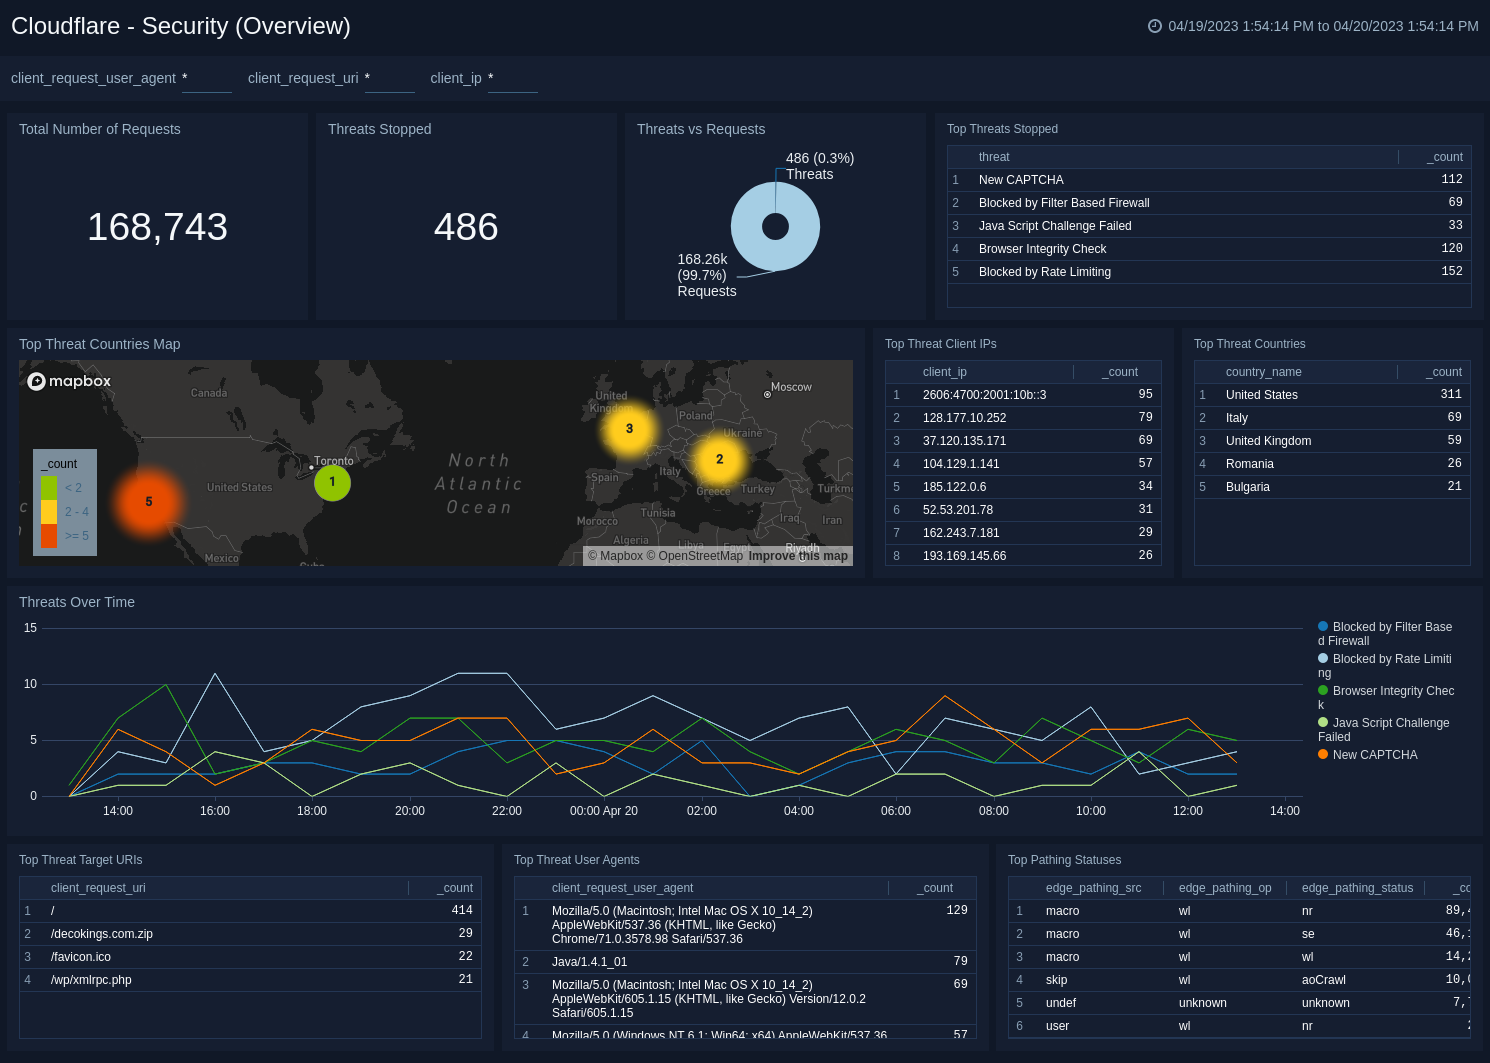 Cloudflare dashboards